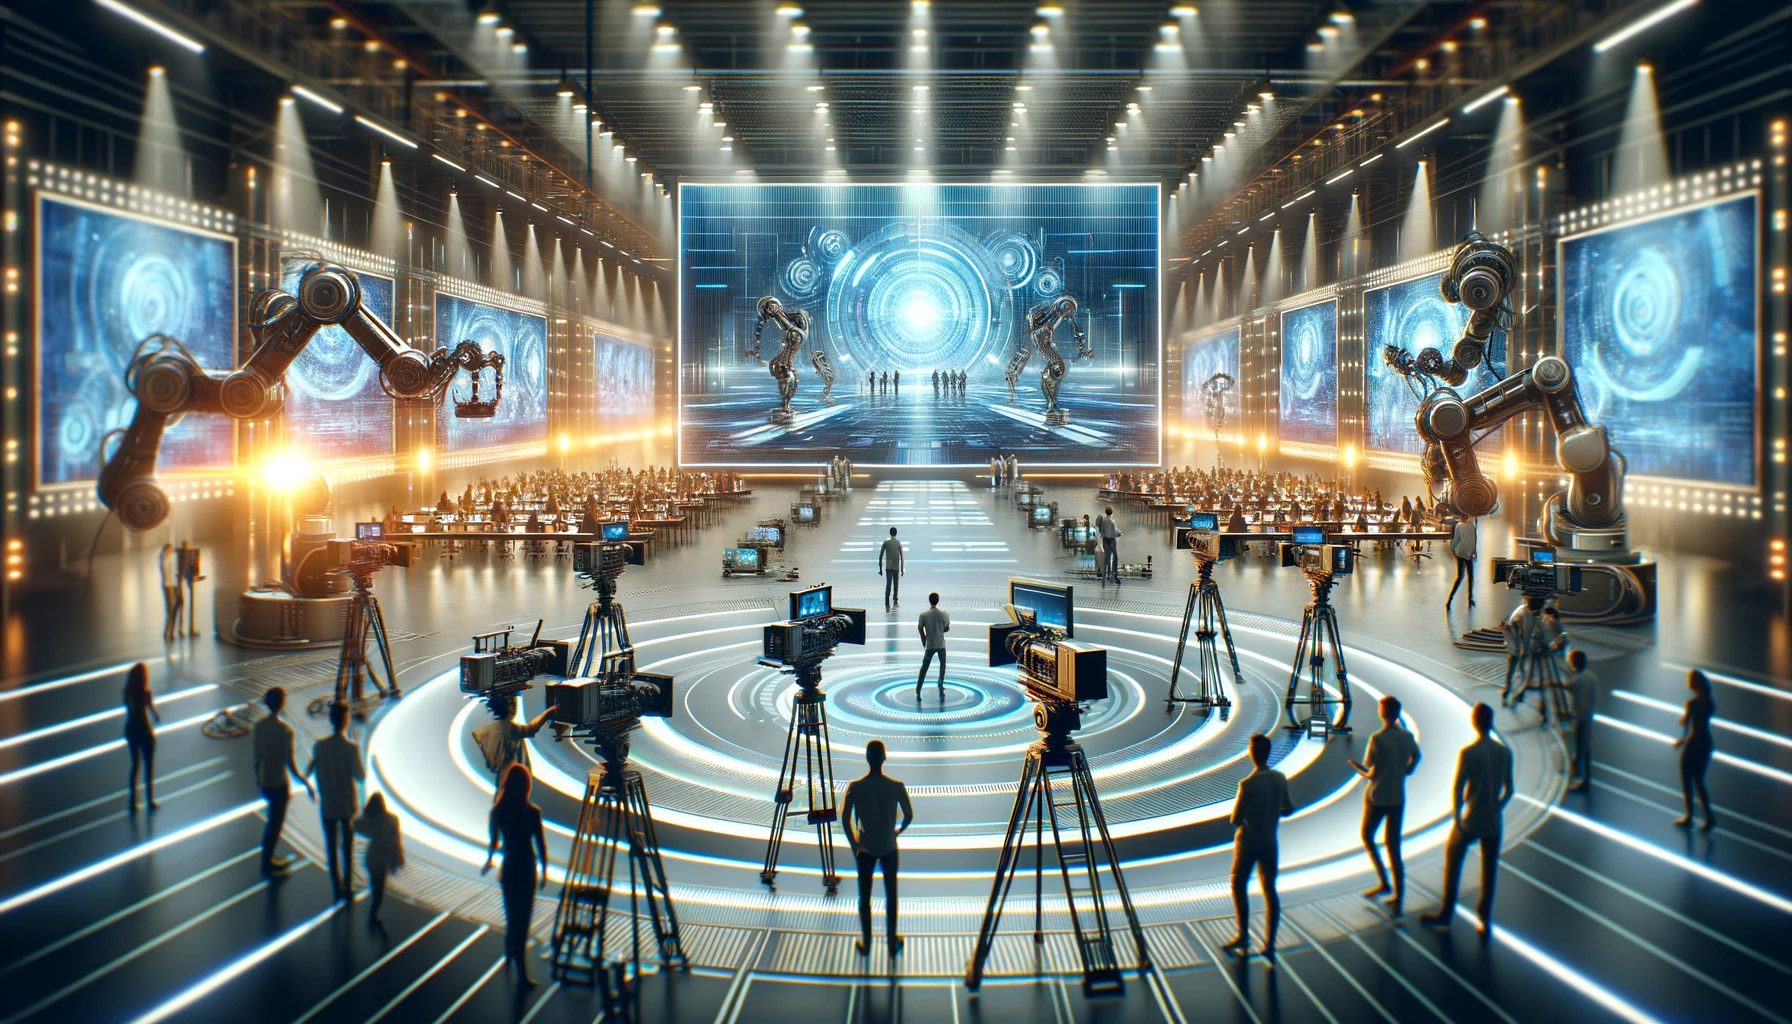 Futuristic commercial filming studio with multiple advanced robotic camera systems, a large virtual LED screen, and a diverse team working with cutting-edge videography technology.